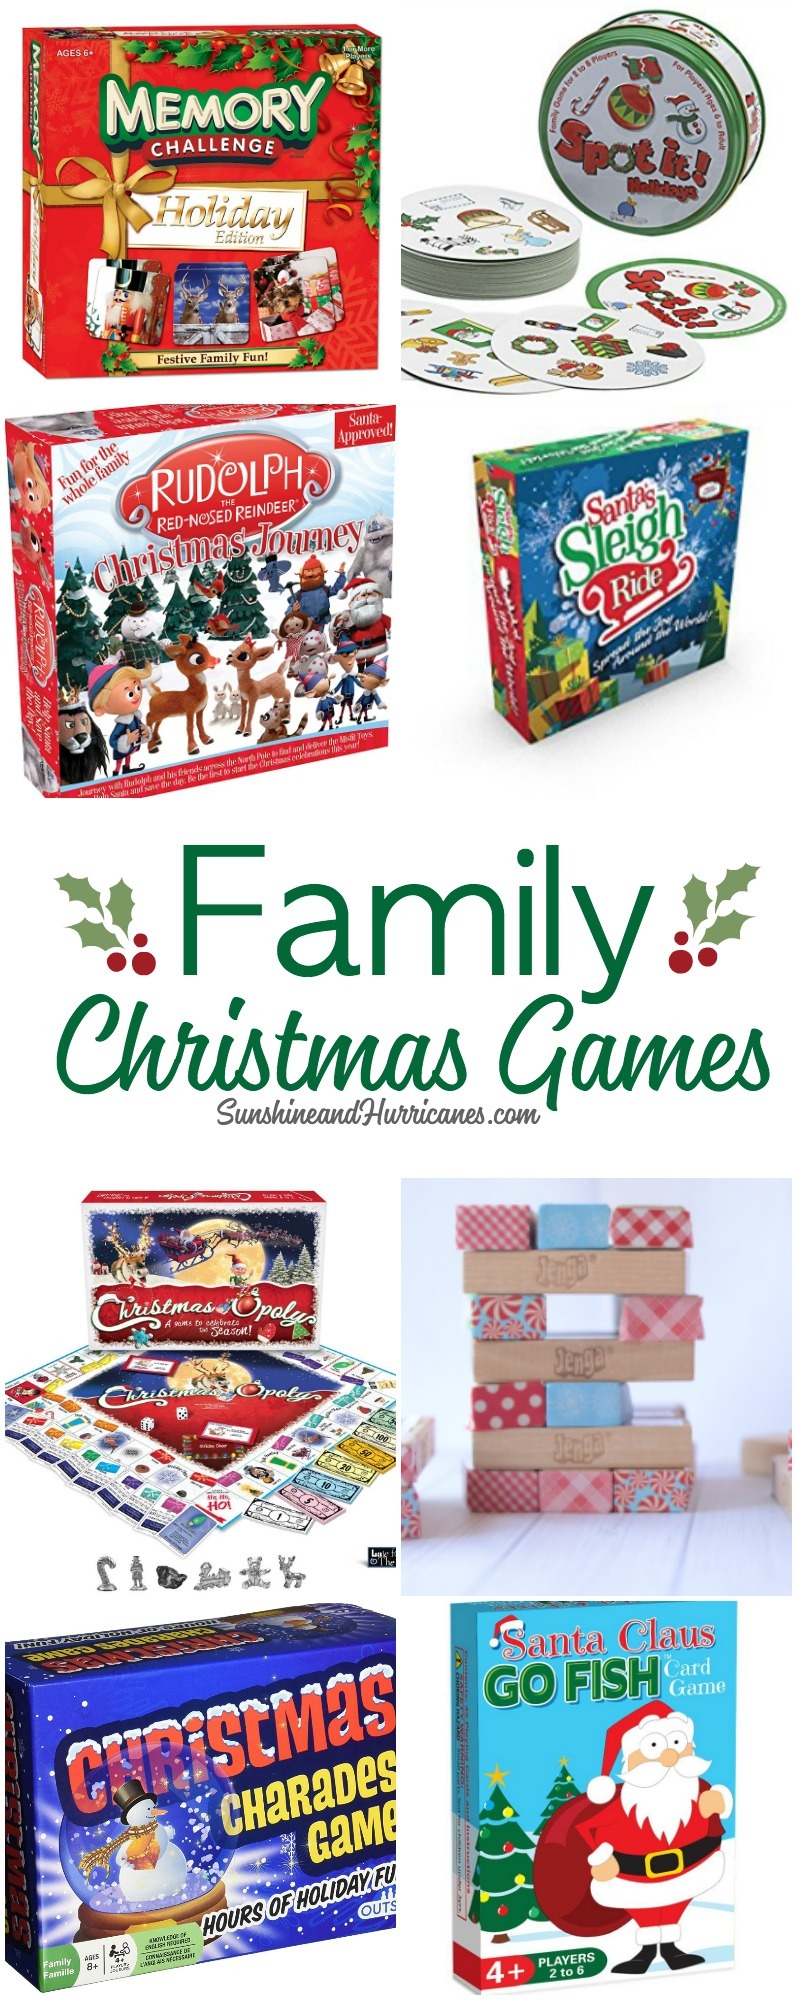 Family Christmas Games - How To Have A Holiday Game Night